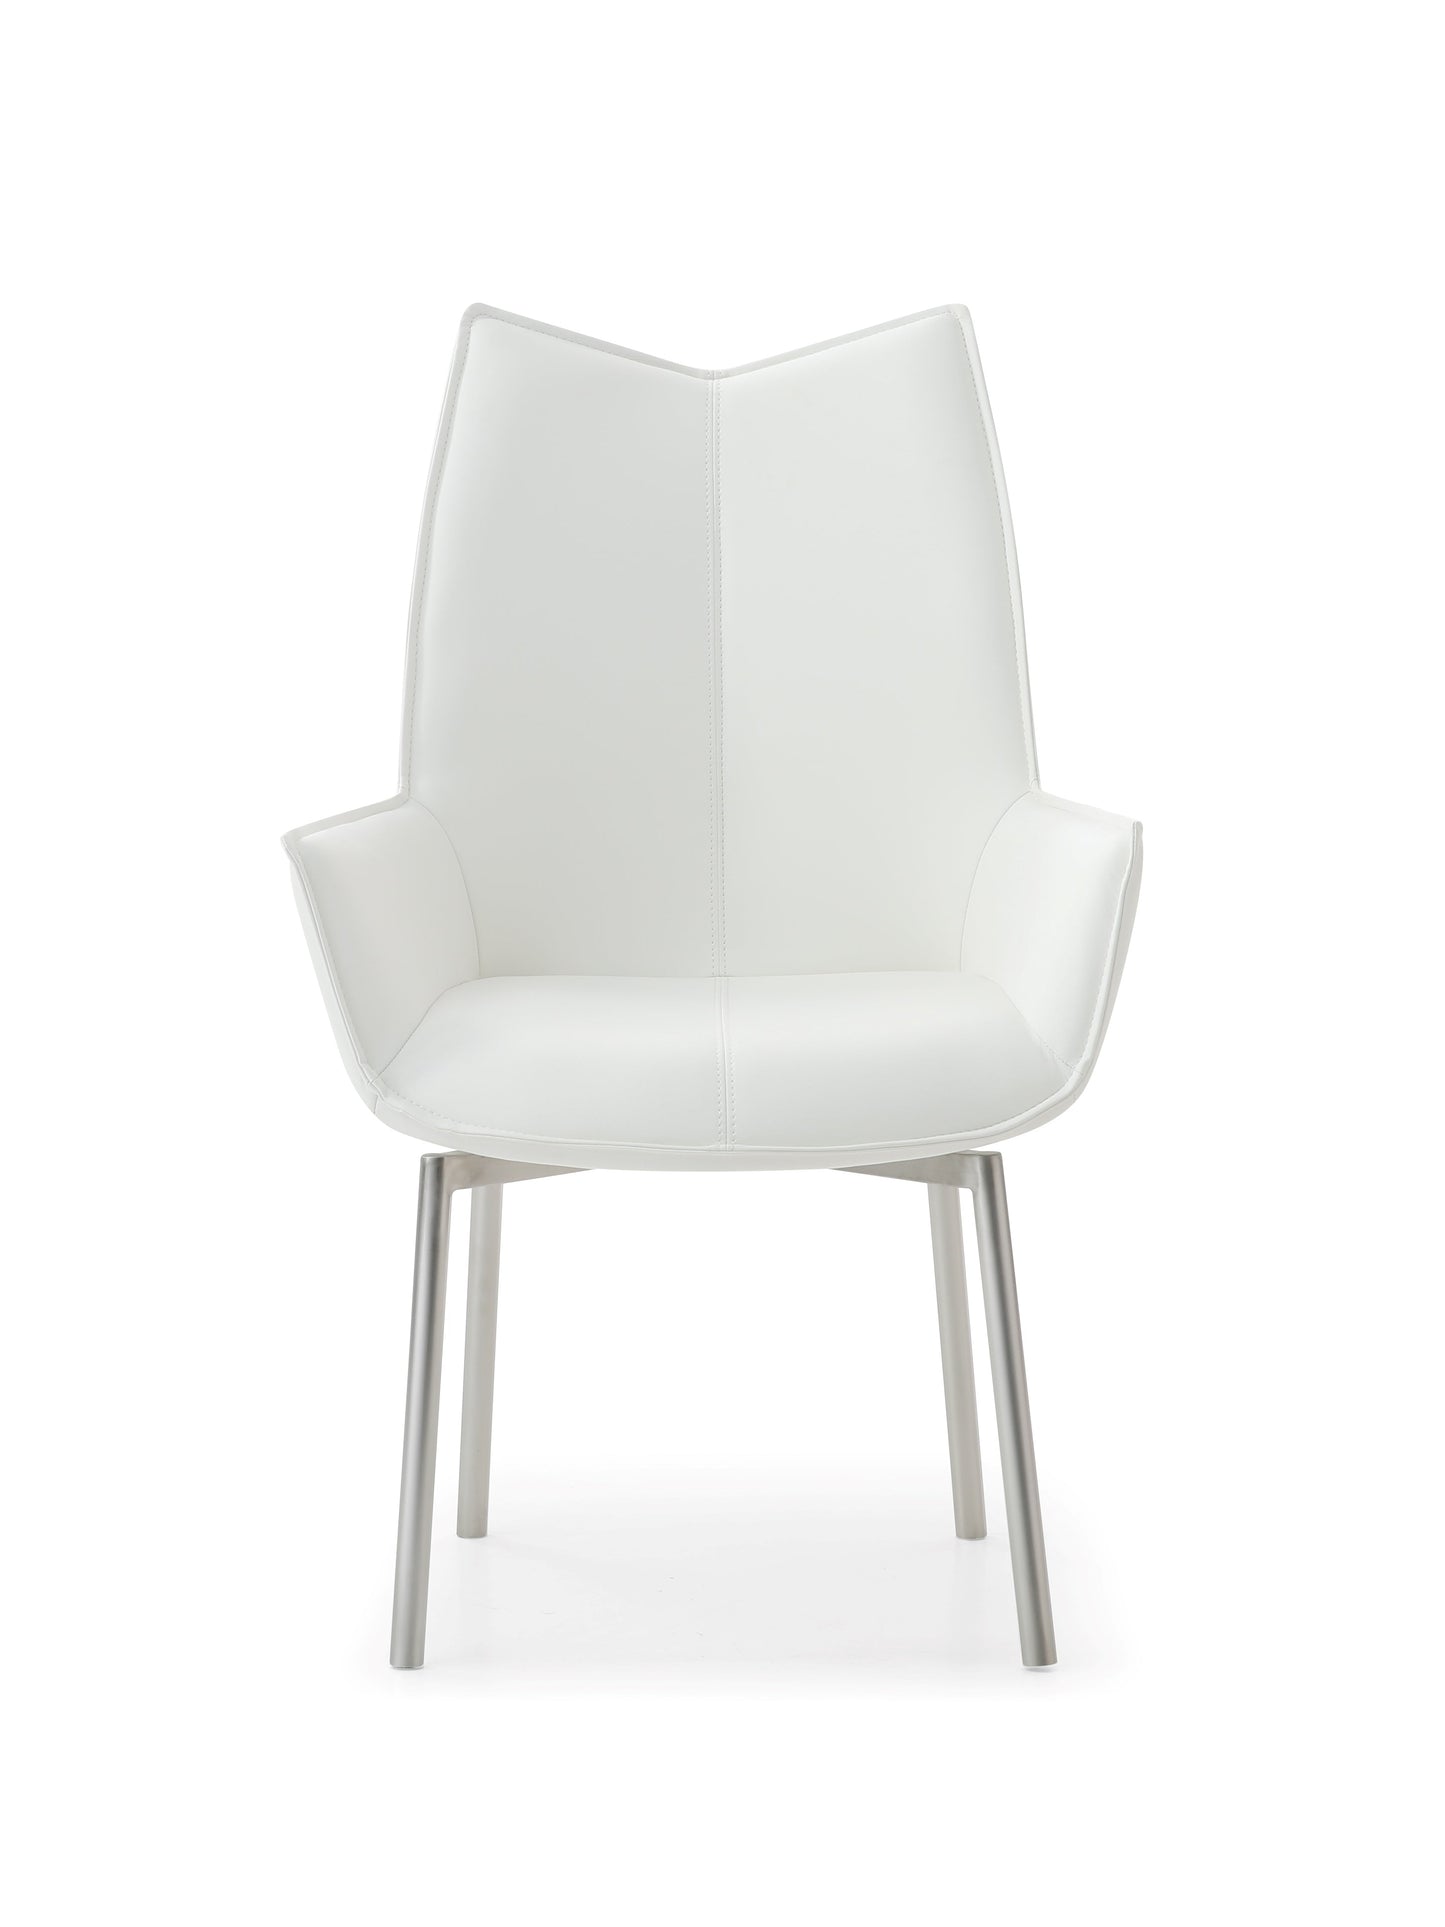 1218 Swivel Dining Chair White